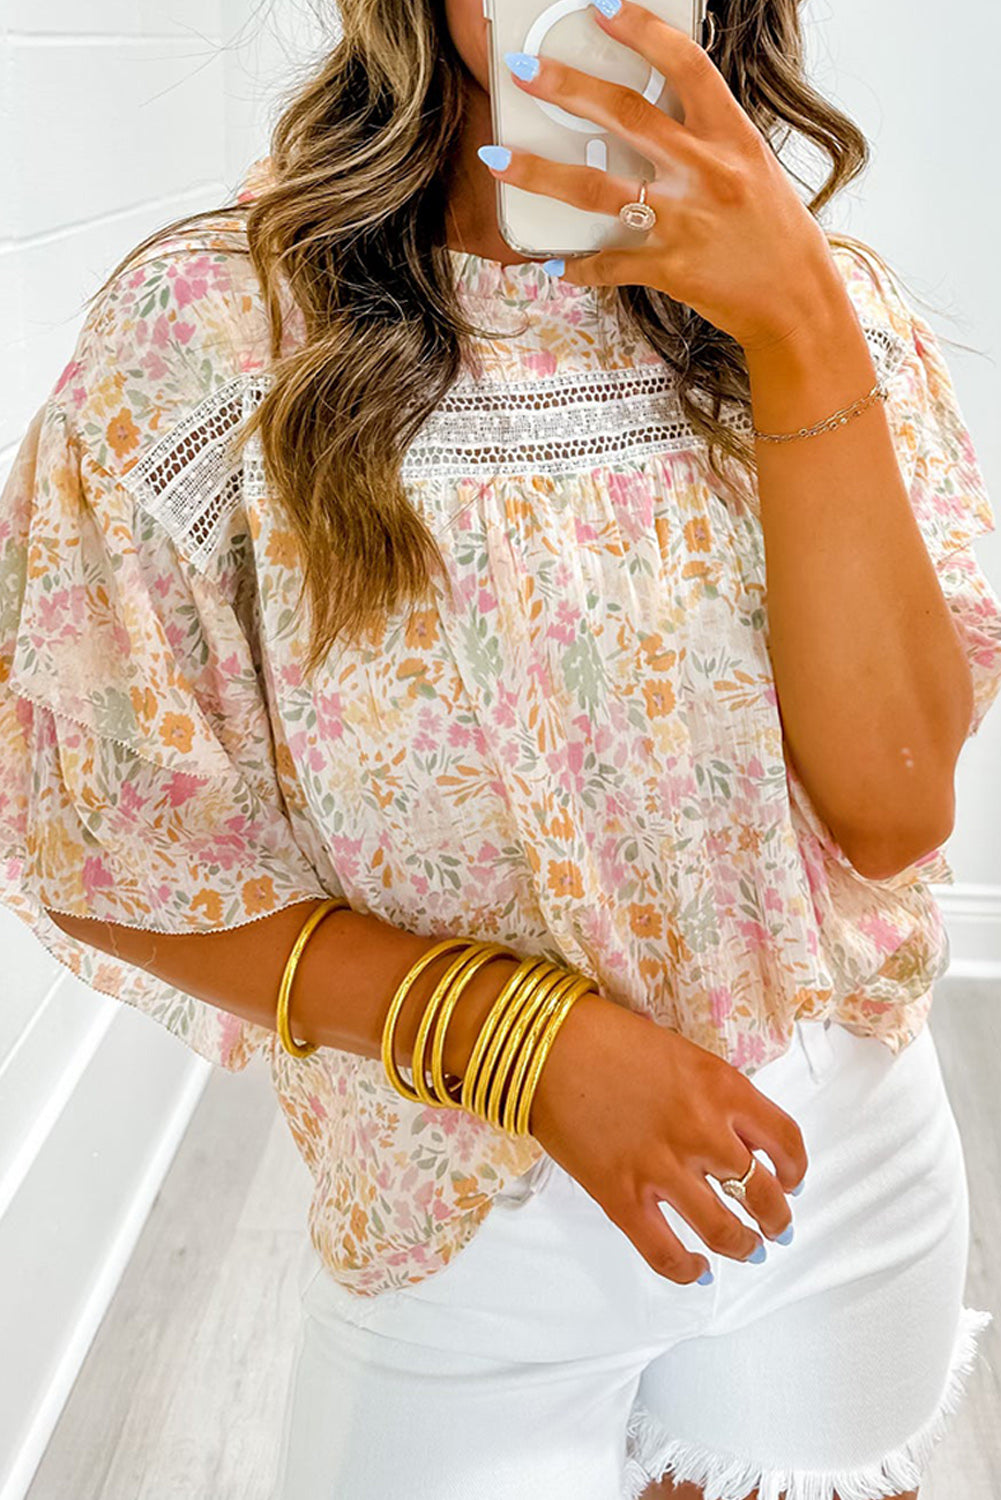 Floral Print Wide Ruffle Sleeves Blouse